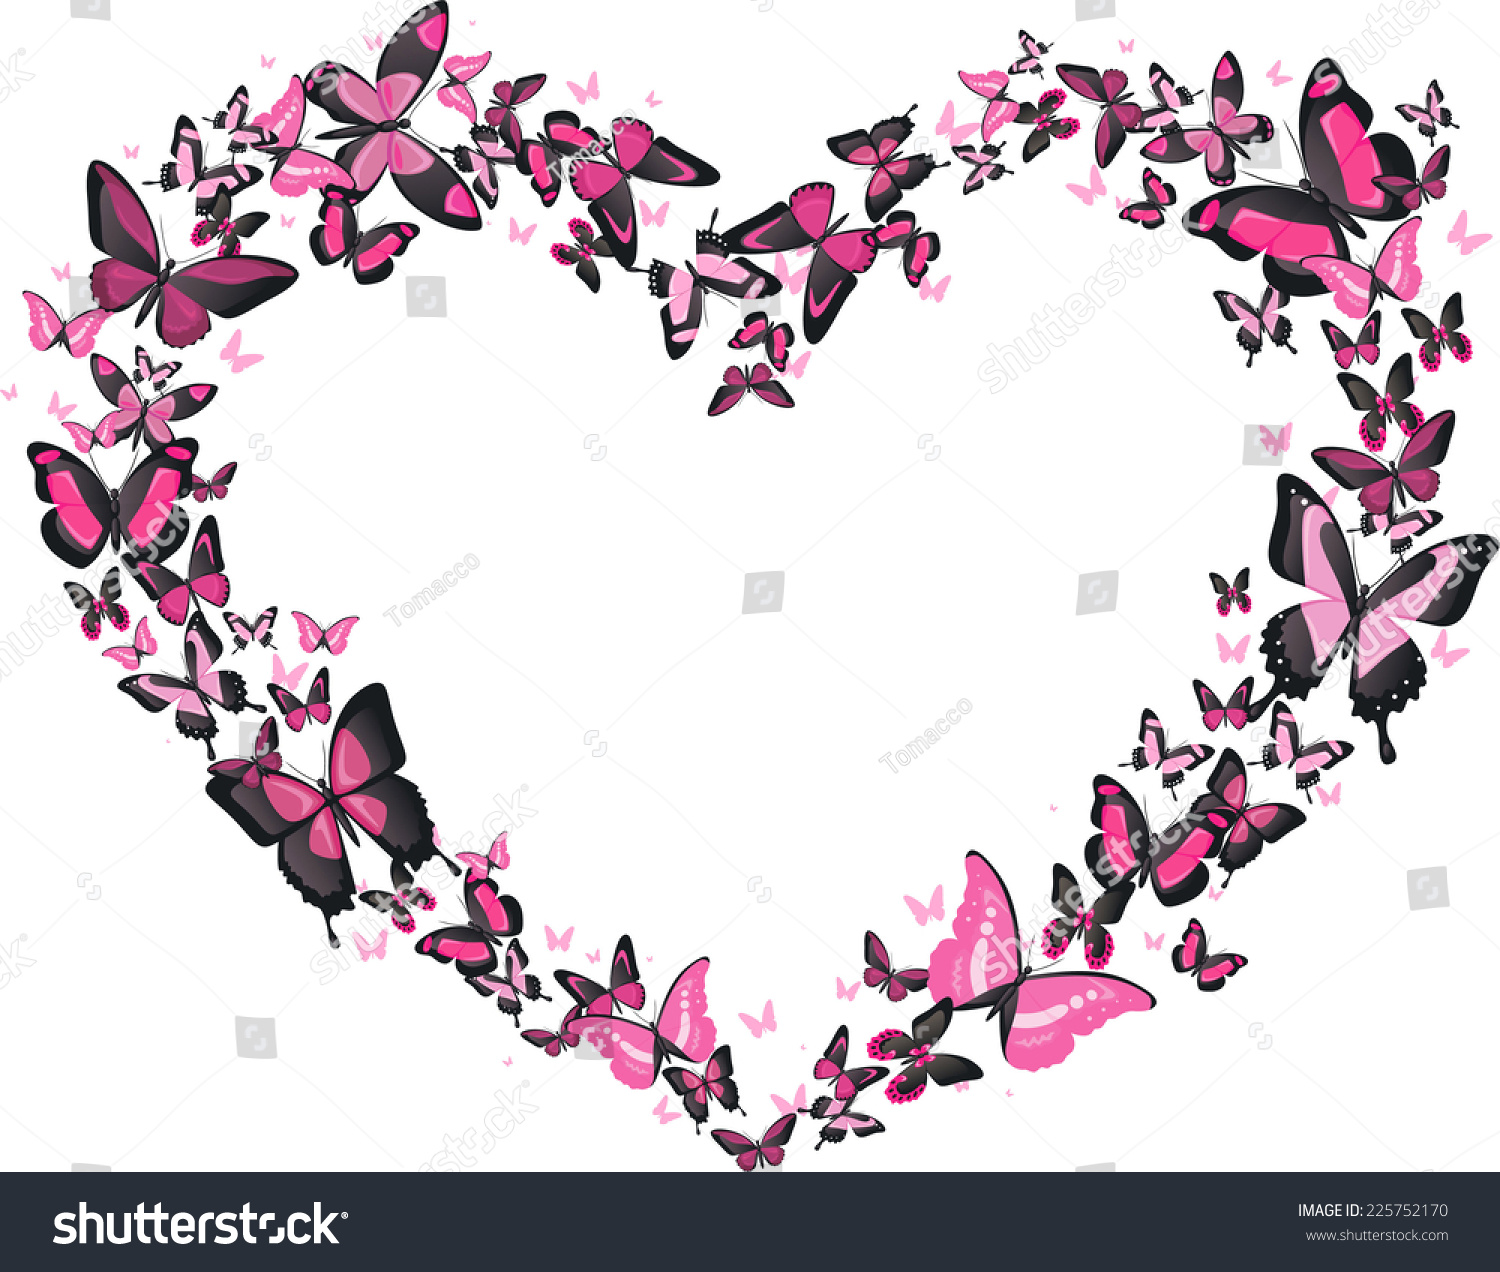 Download Heart Shaped Butterfly Flight Pink Black Stock Vector ...